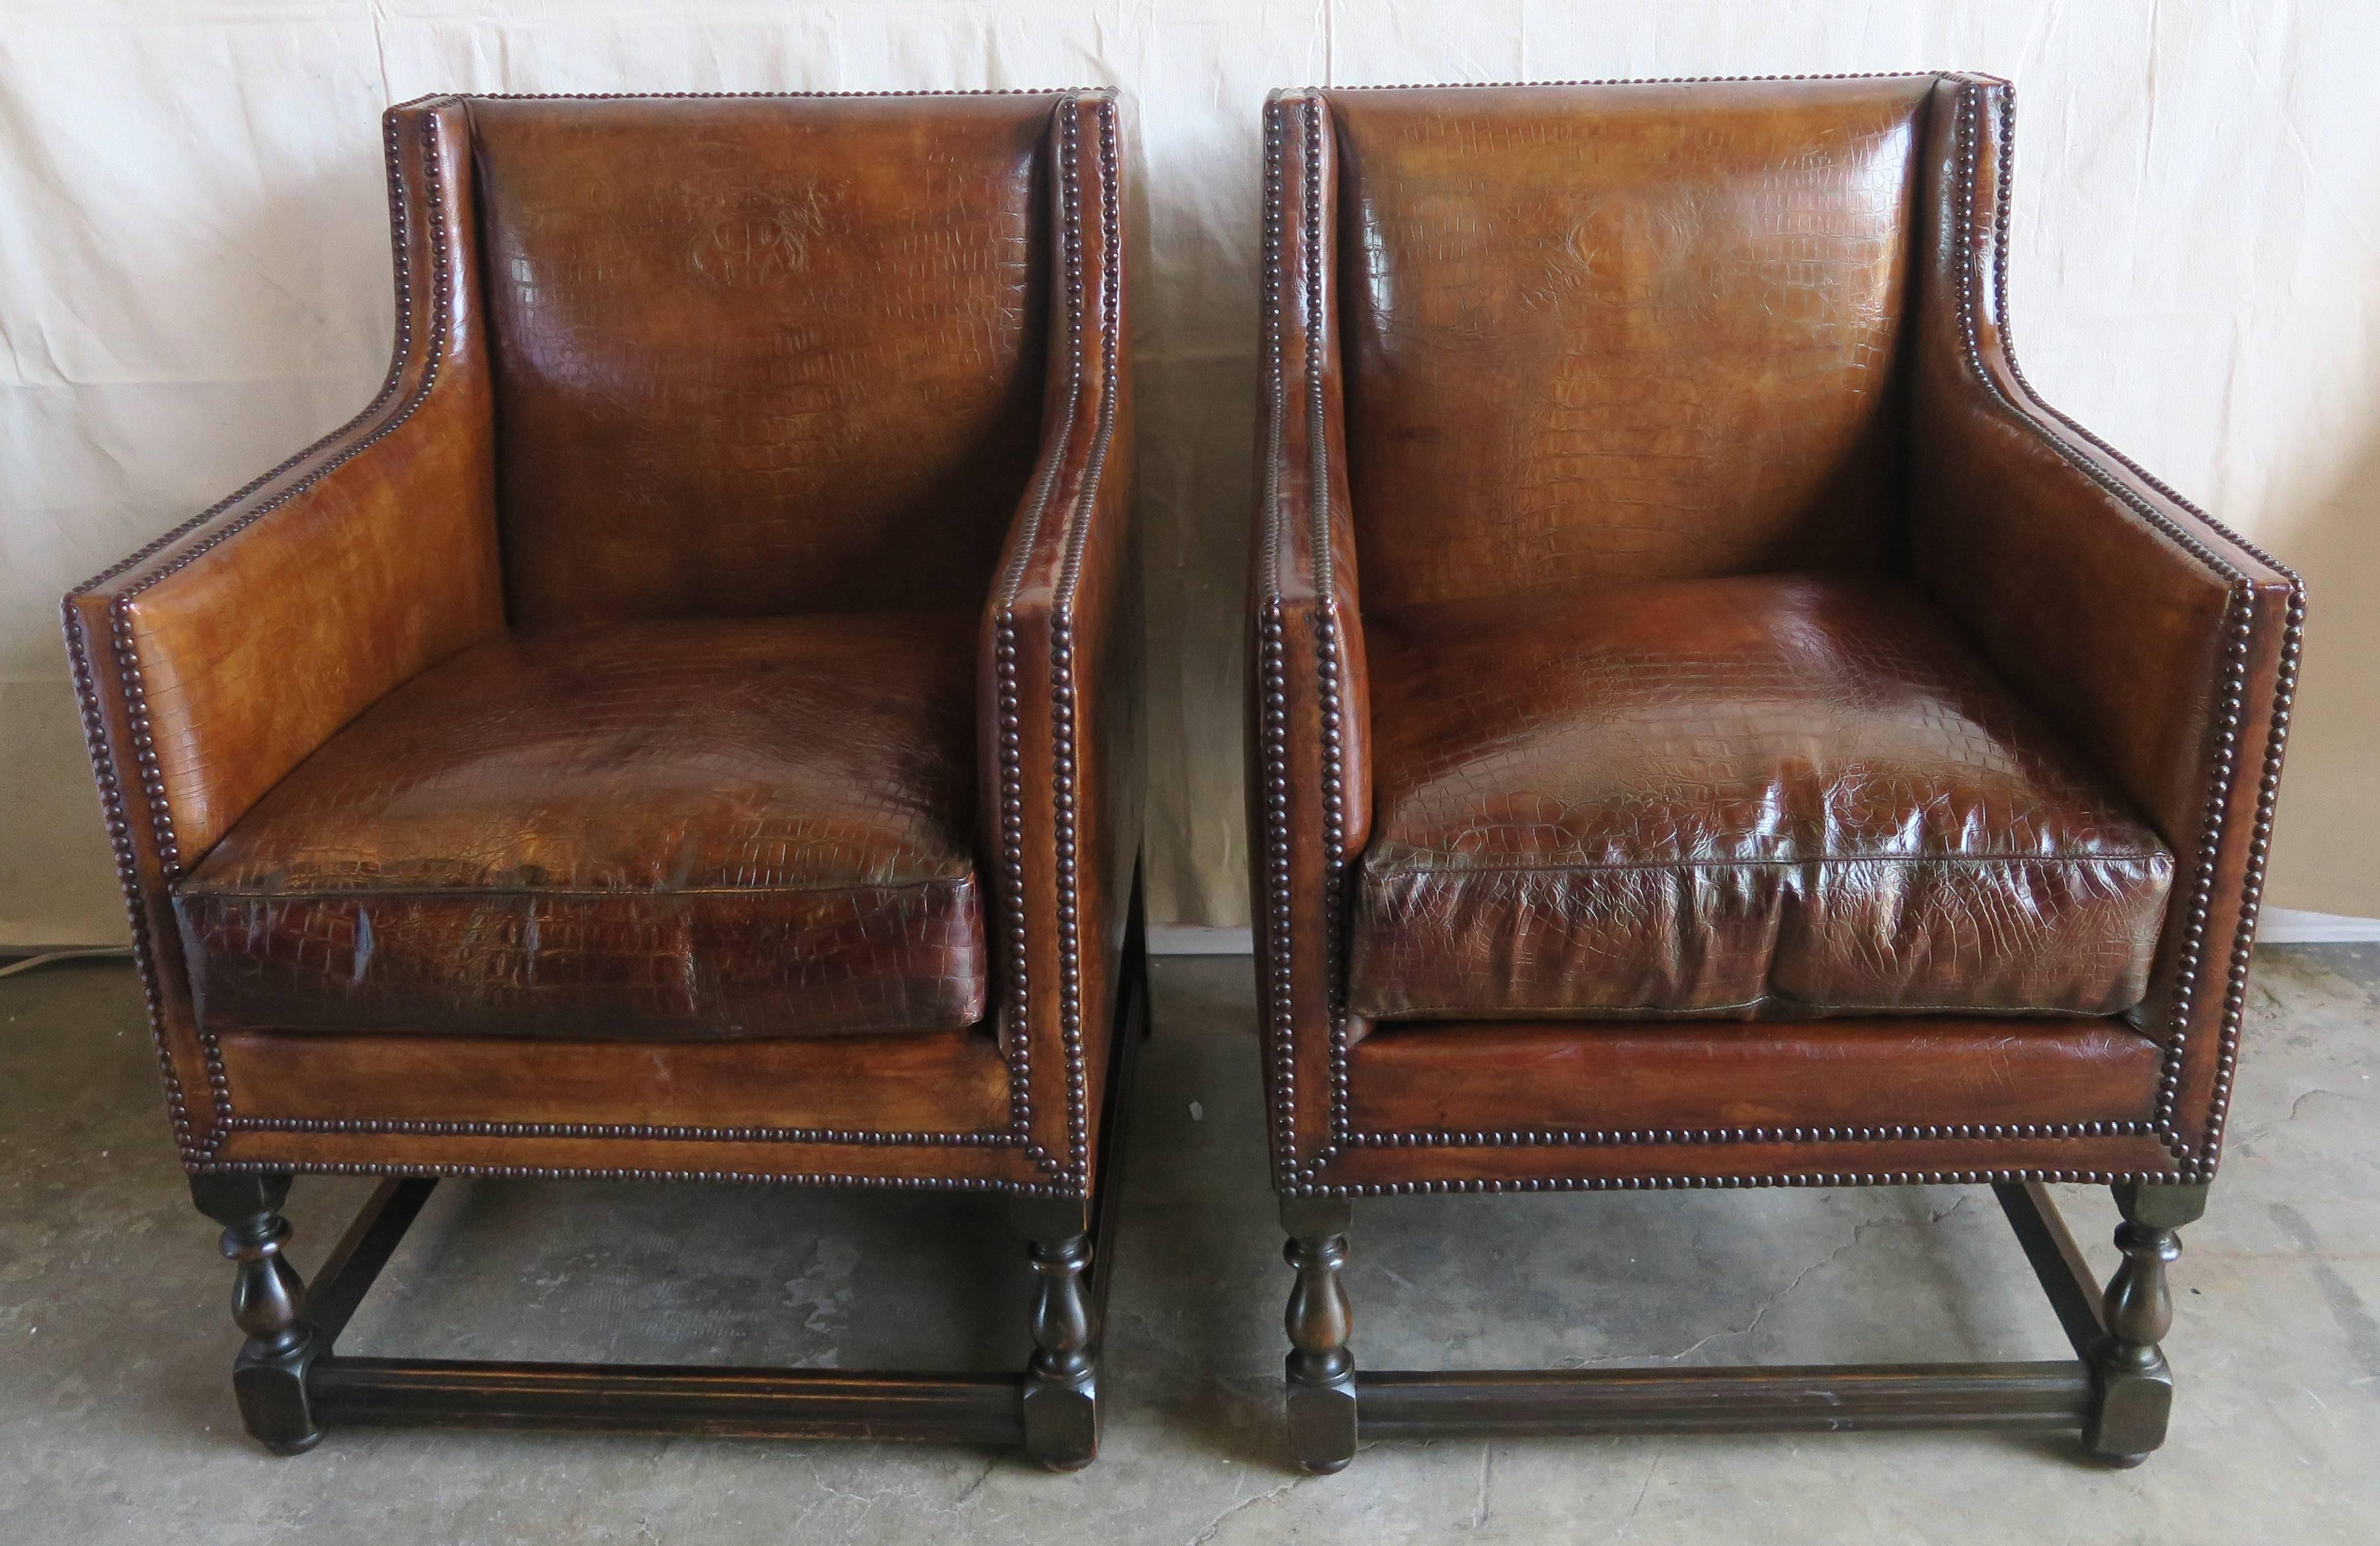 Pair of 1930s Deco style club chairs upholstered in a faux crocodile embossed leather with antique brass colored nailhead trim detail. Loose down filled cushions.
Measures: Seat height 20